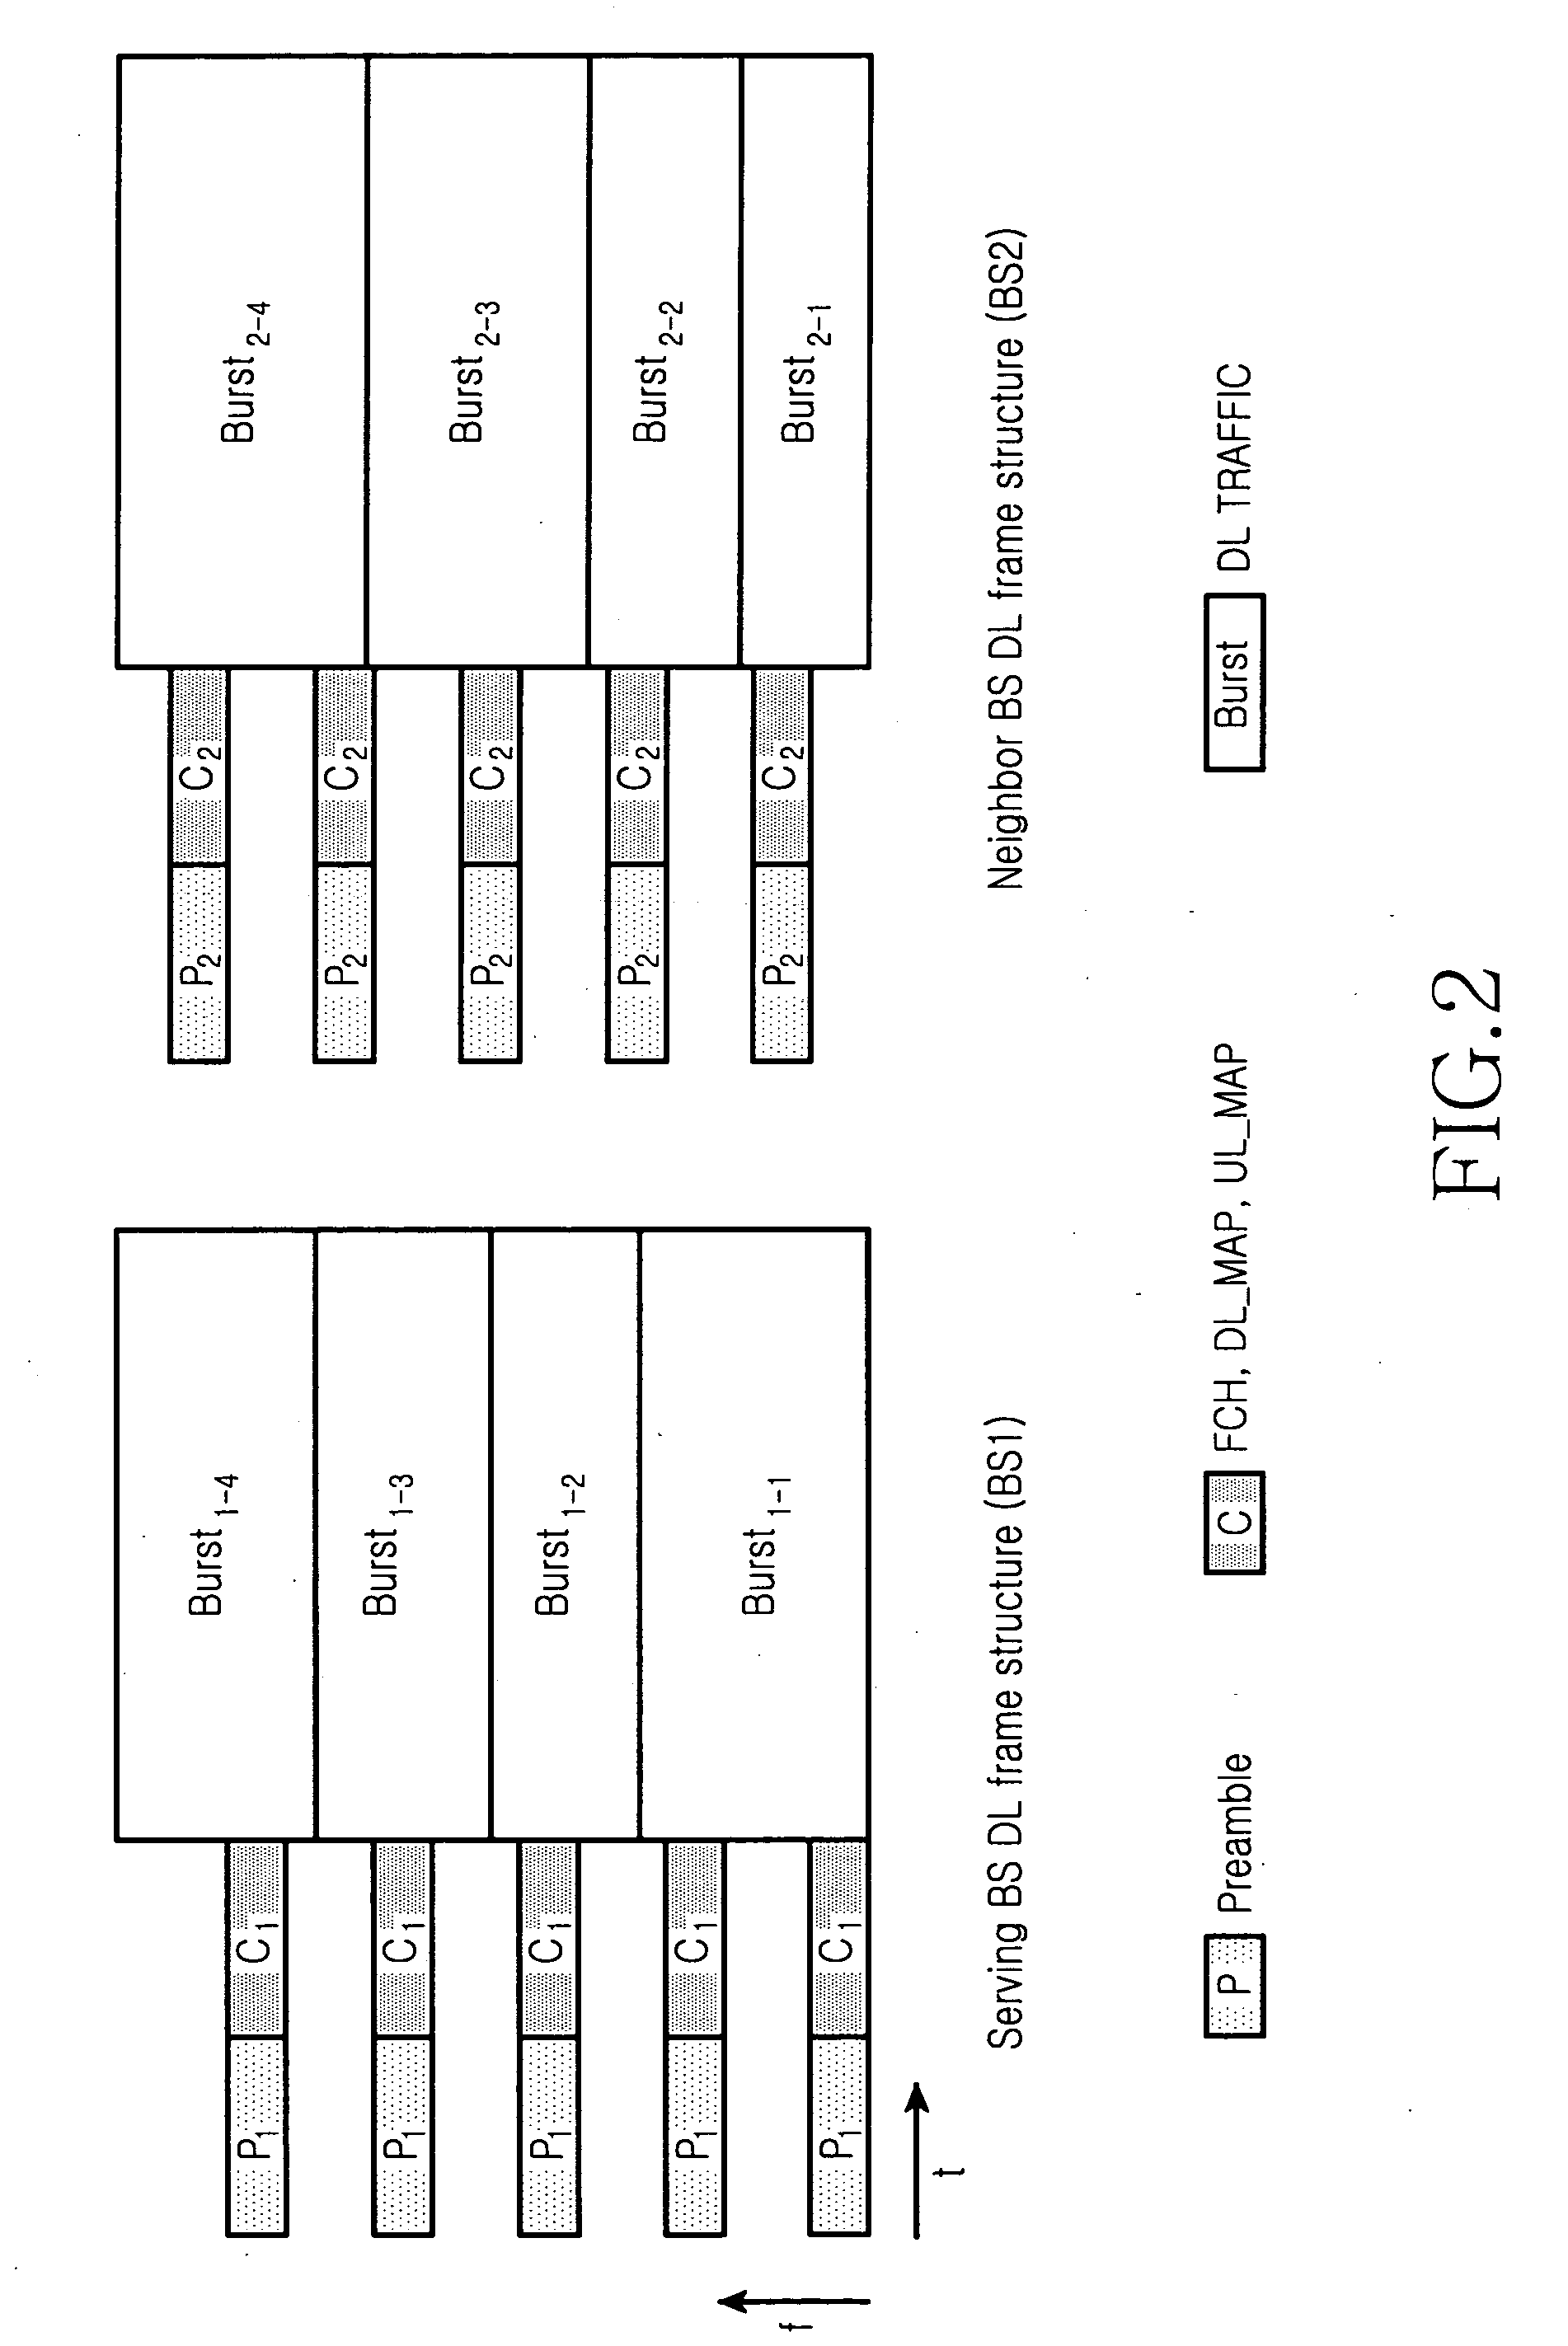 Method of allocating resources and method of receiving the allocated resources in a communication system